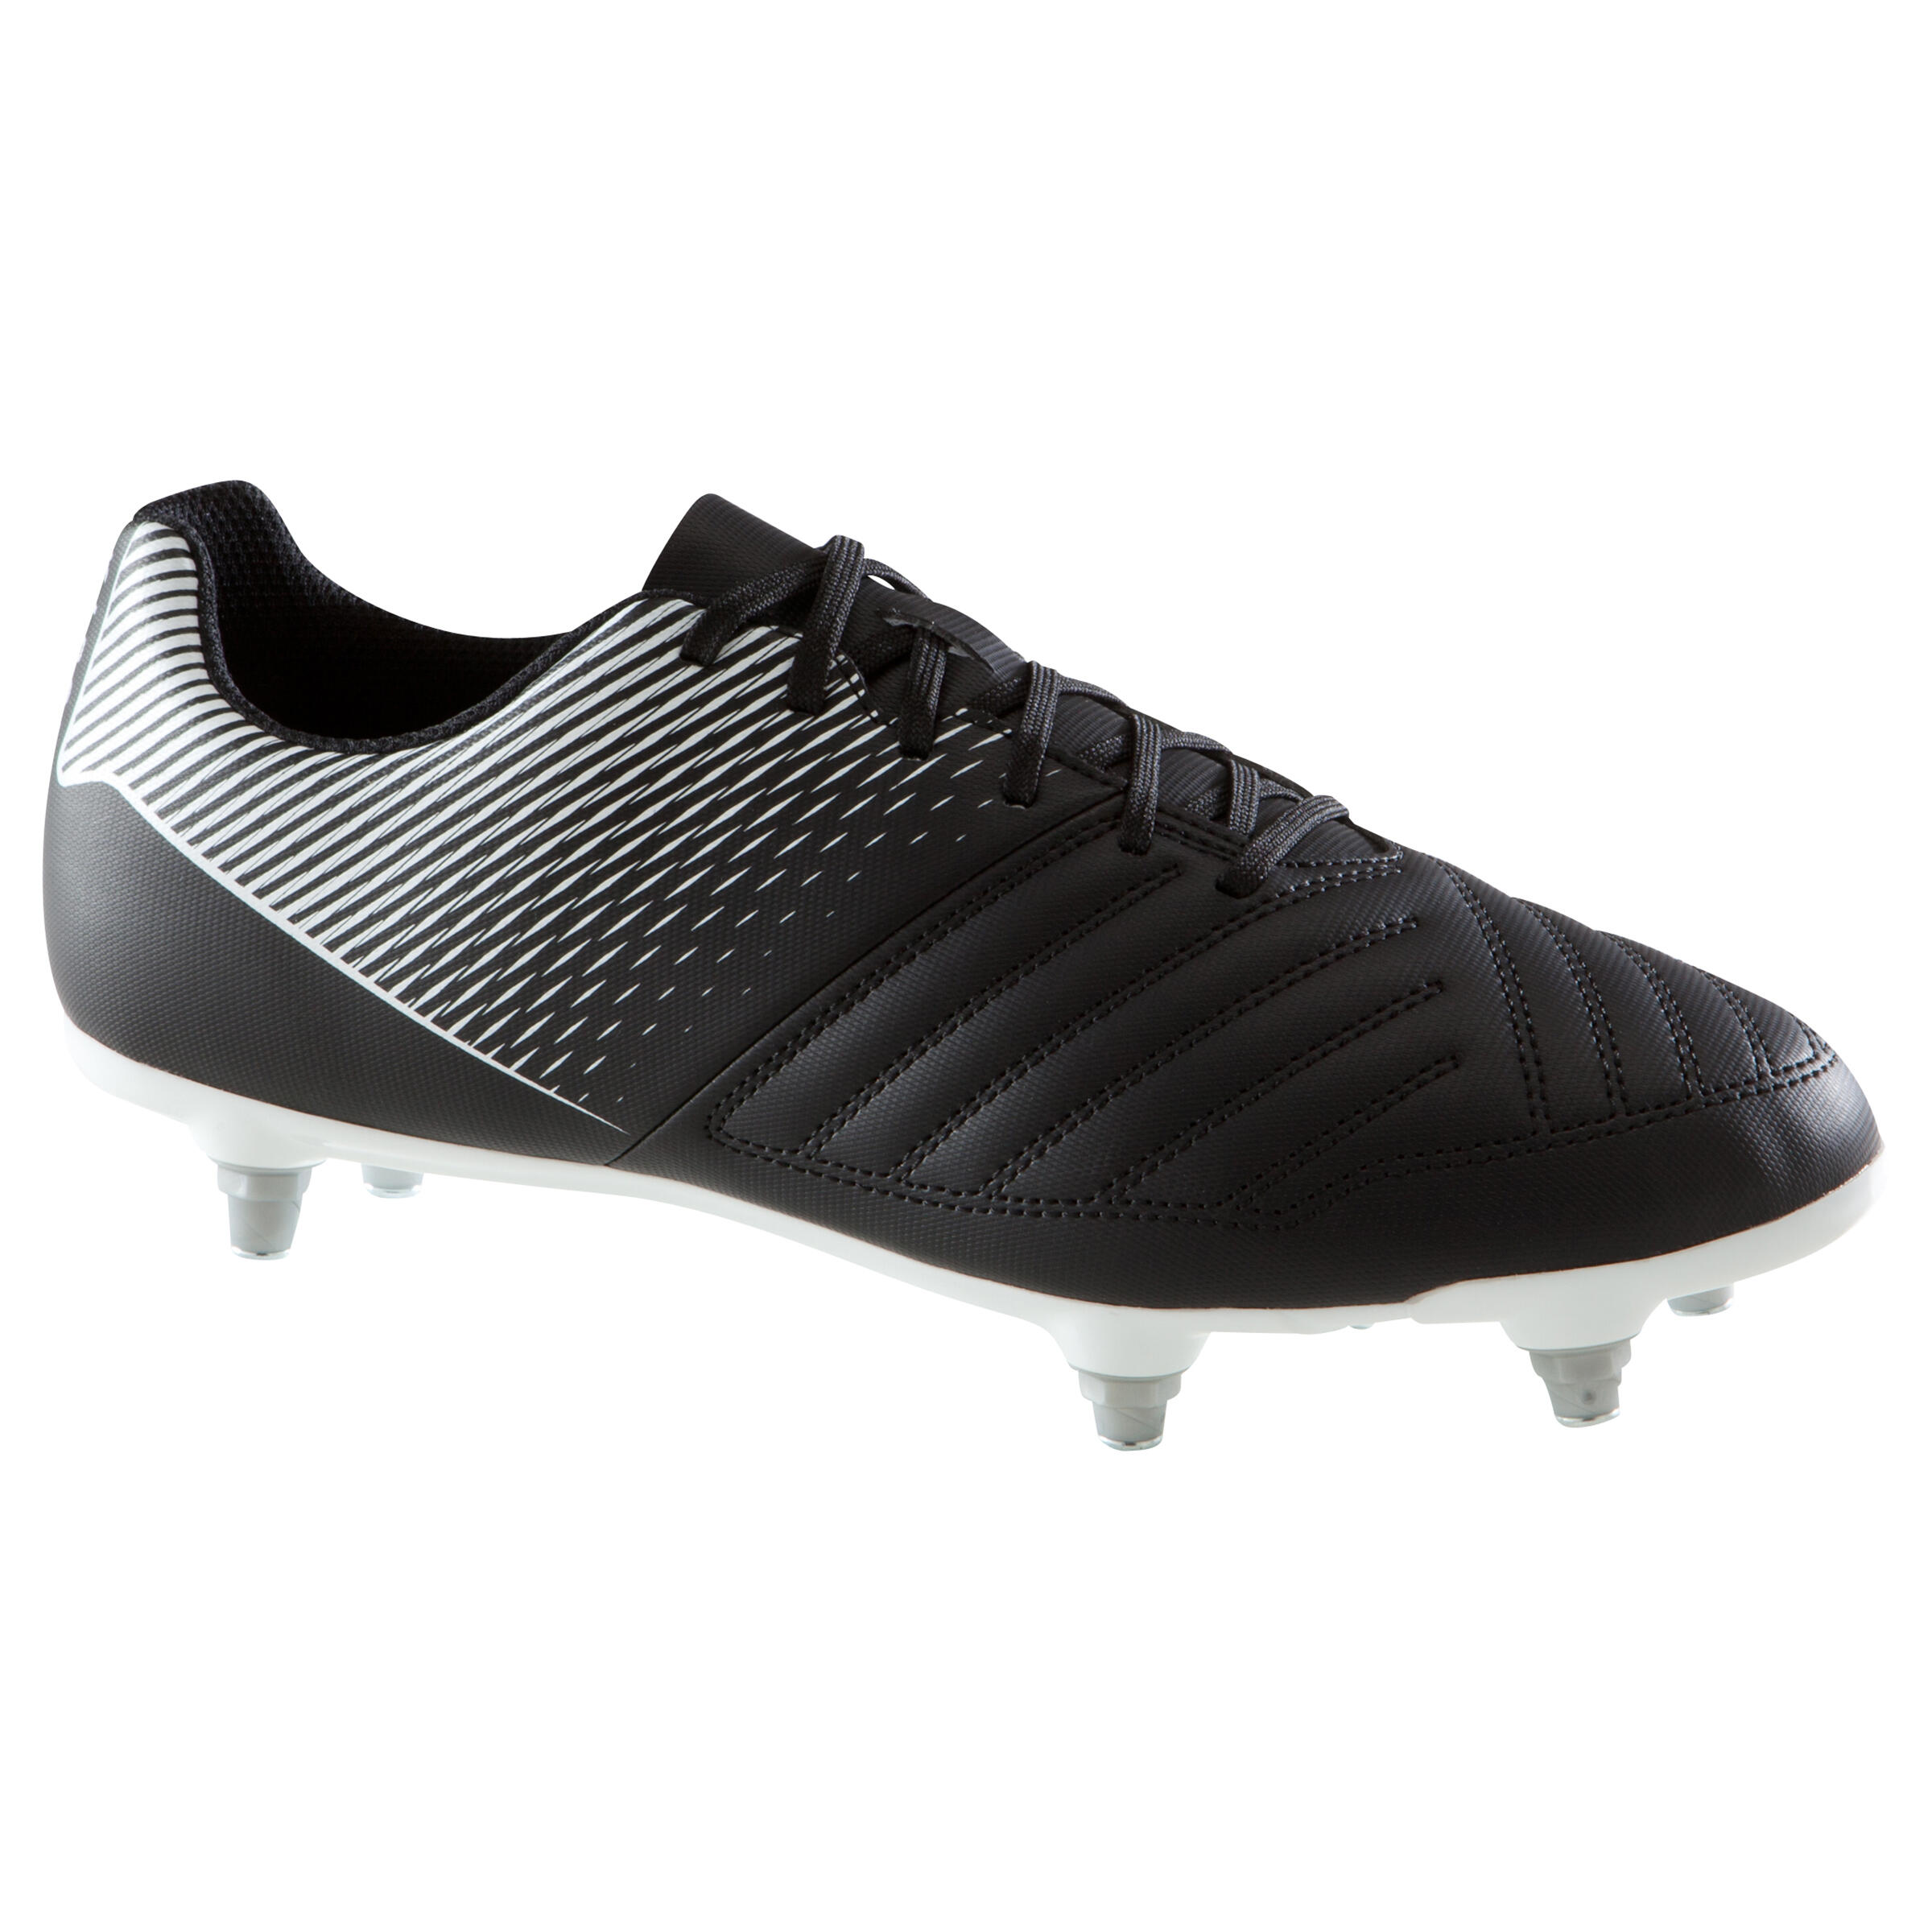 black and white soccer shoes